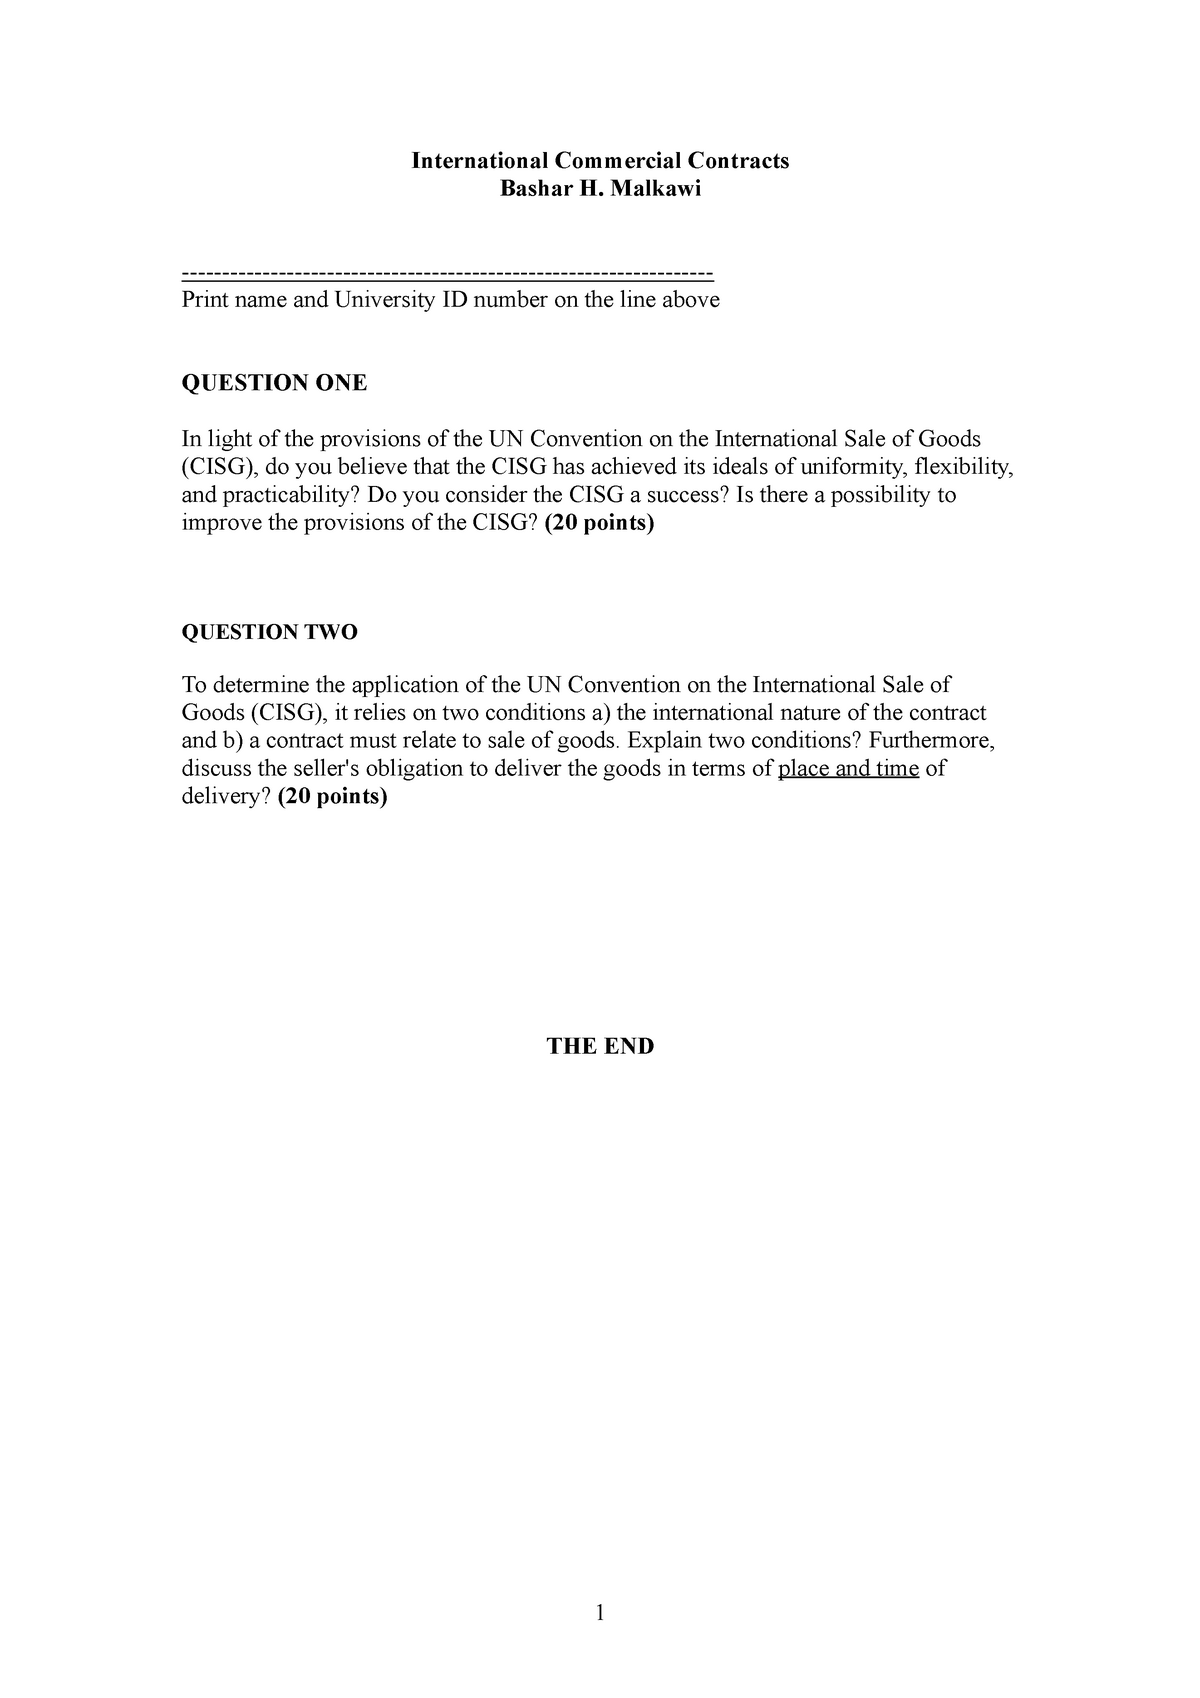 exam-21-july-2013-questions-international-commercial-contracts